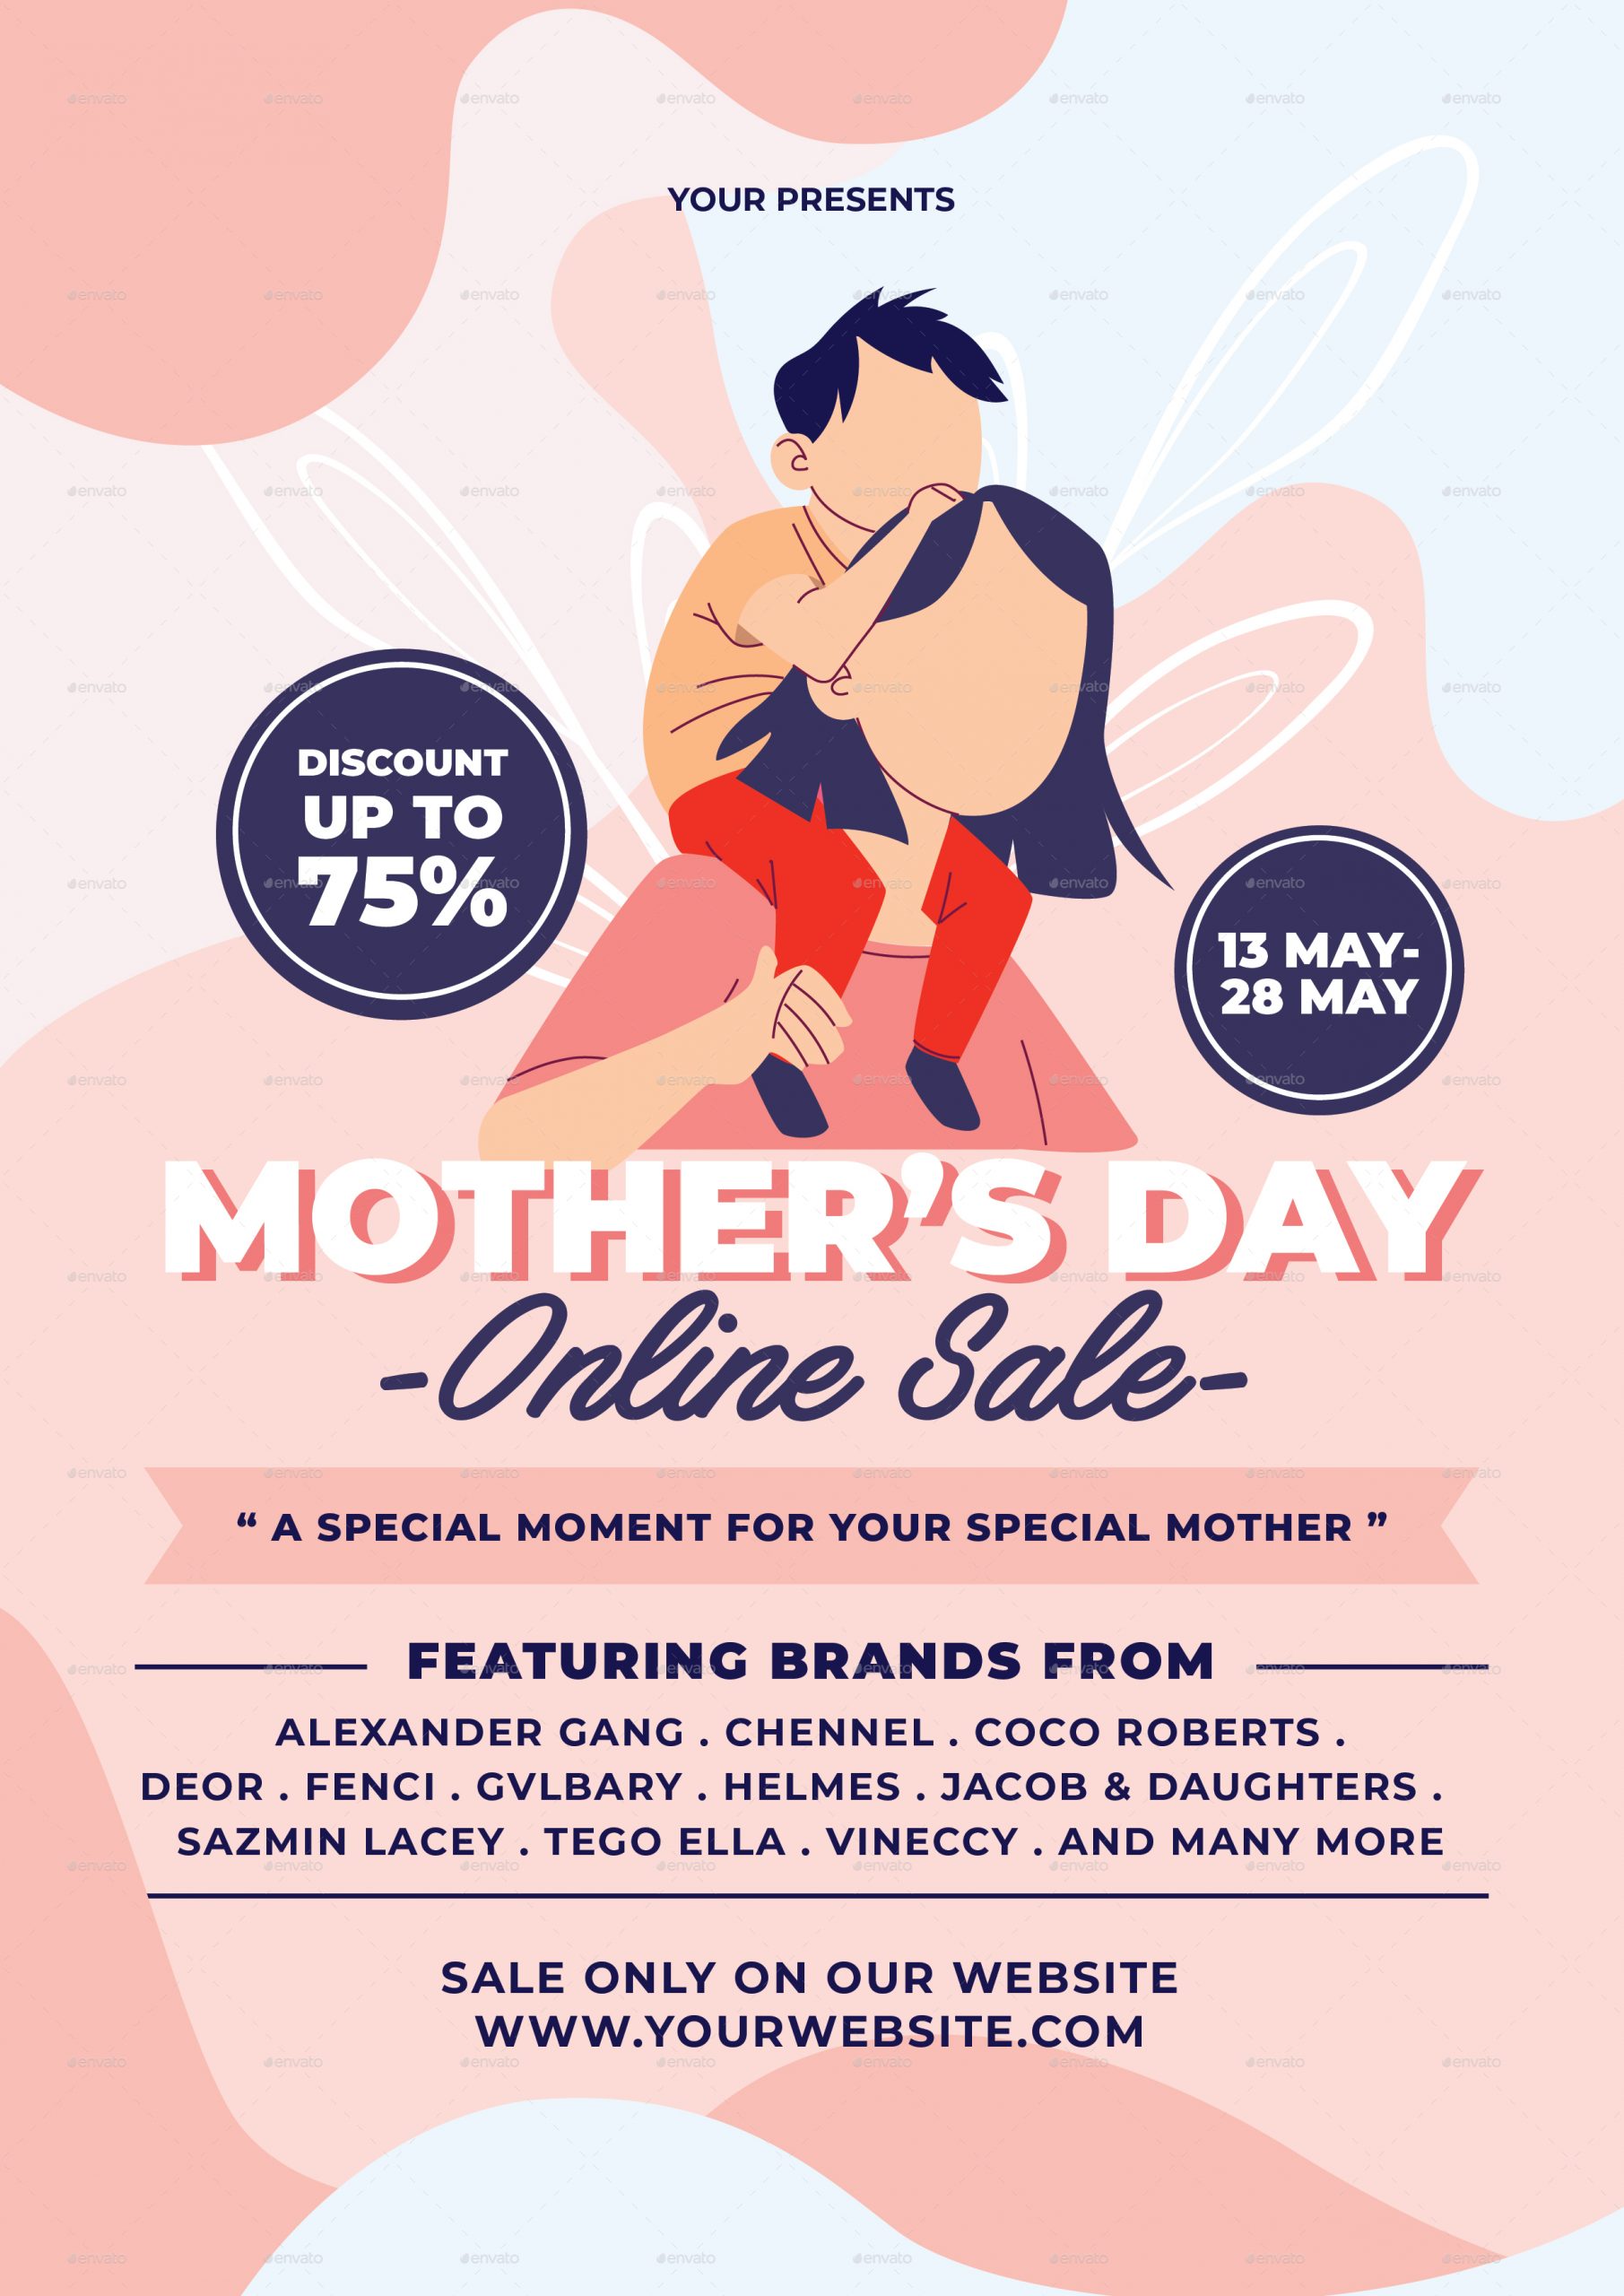 mother's day sale flyer template, mother's day bake sale flyer, lowes mother's day sale ad, mothers day sale flyer, mother's day sale poster, mothers day flyer ideas